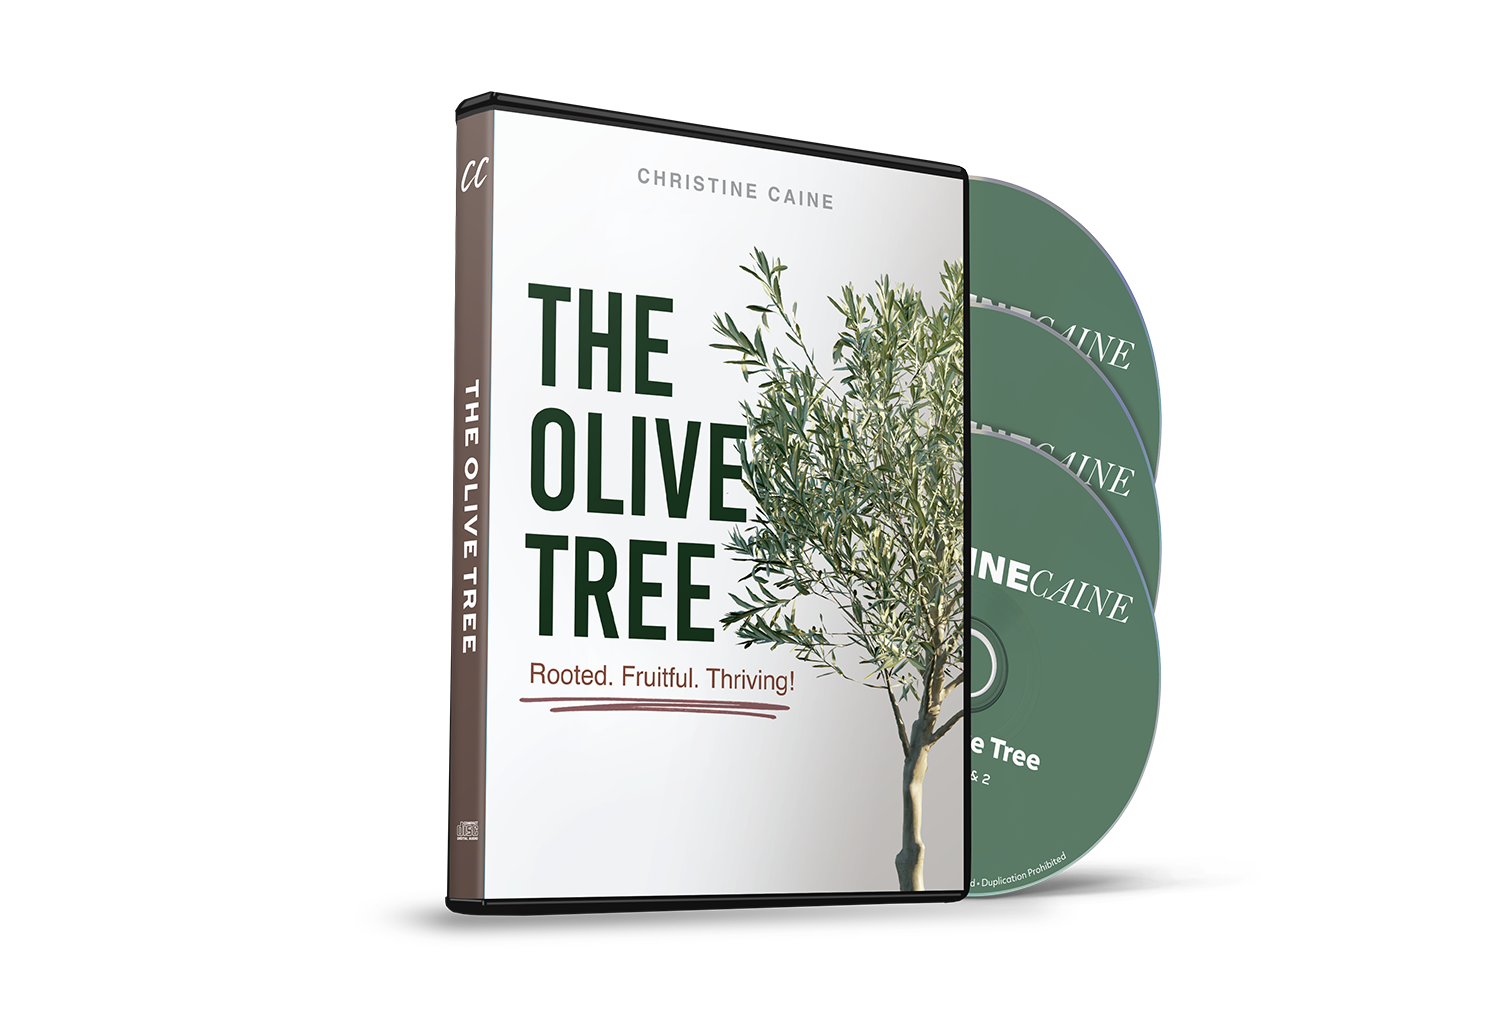 The Olive Tree by Christine Caine by TBN